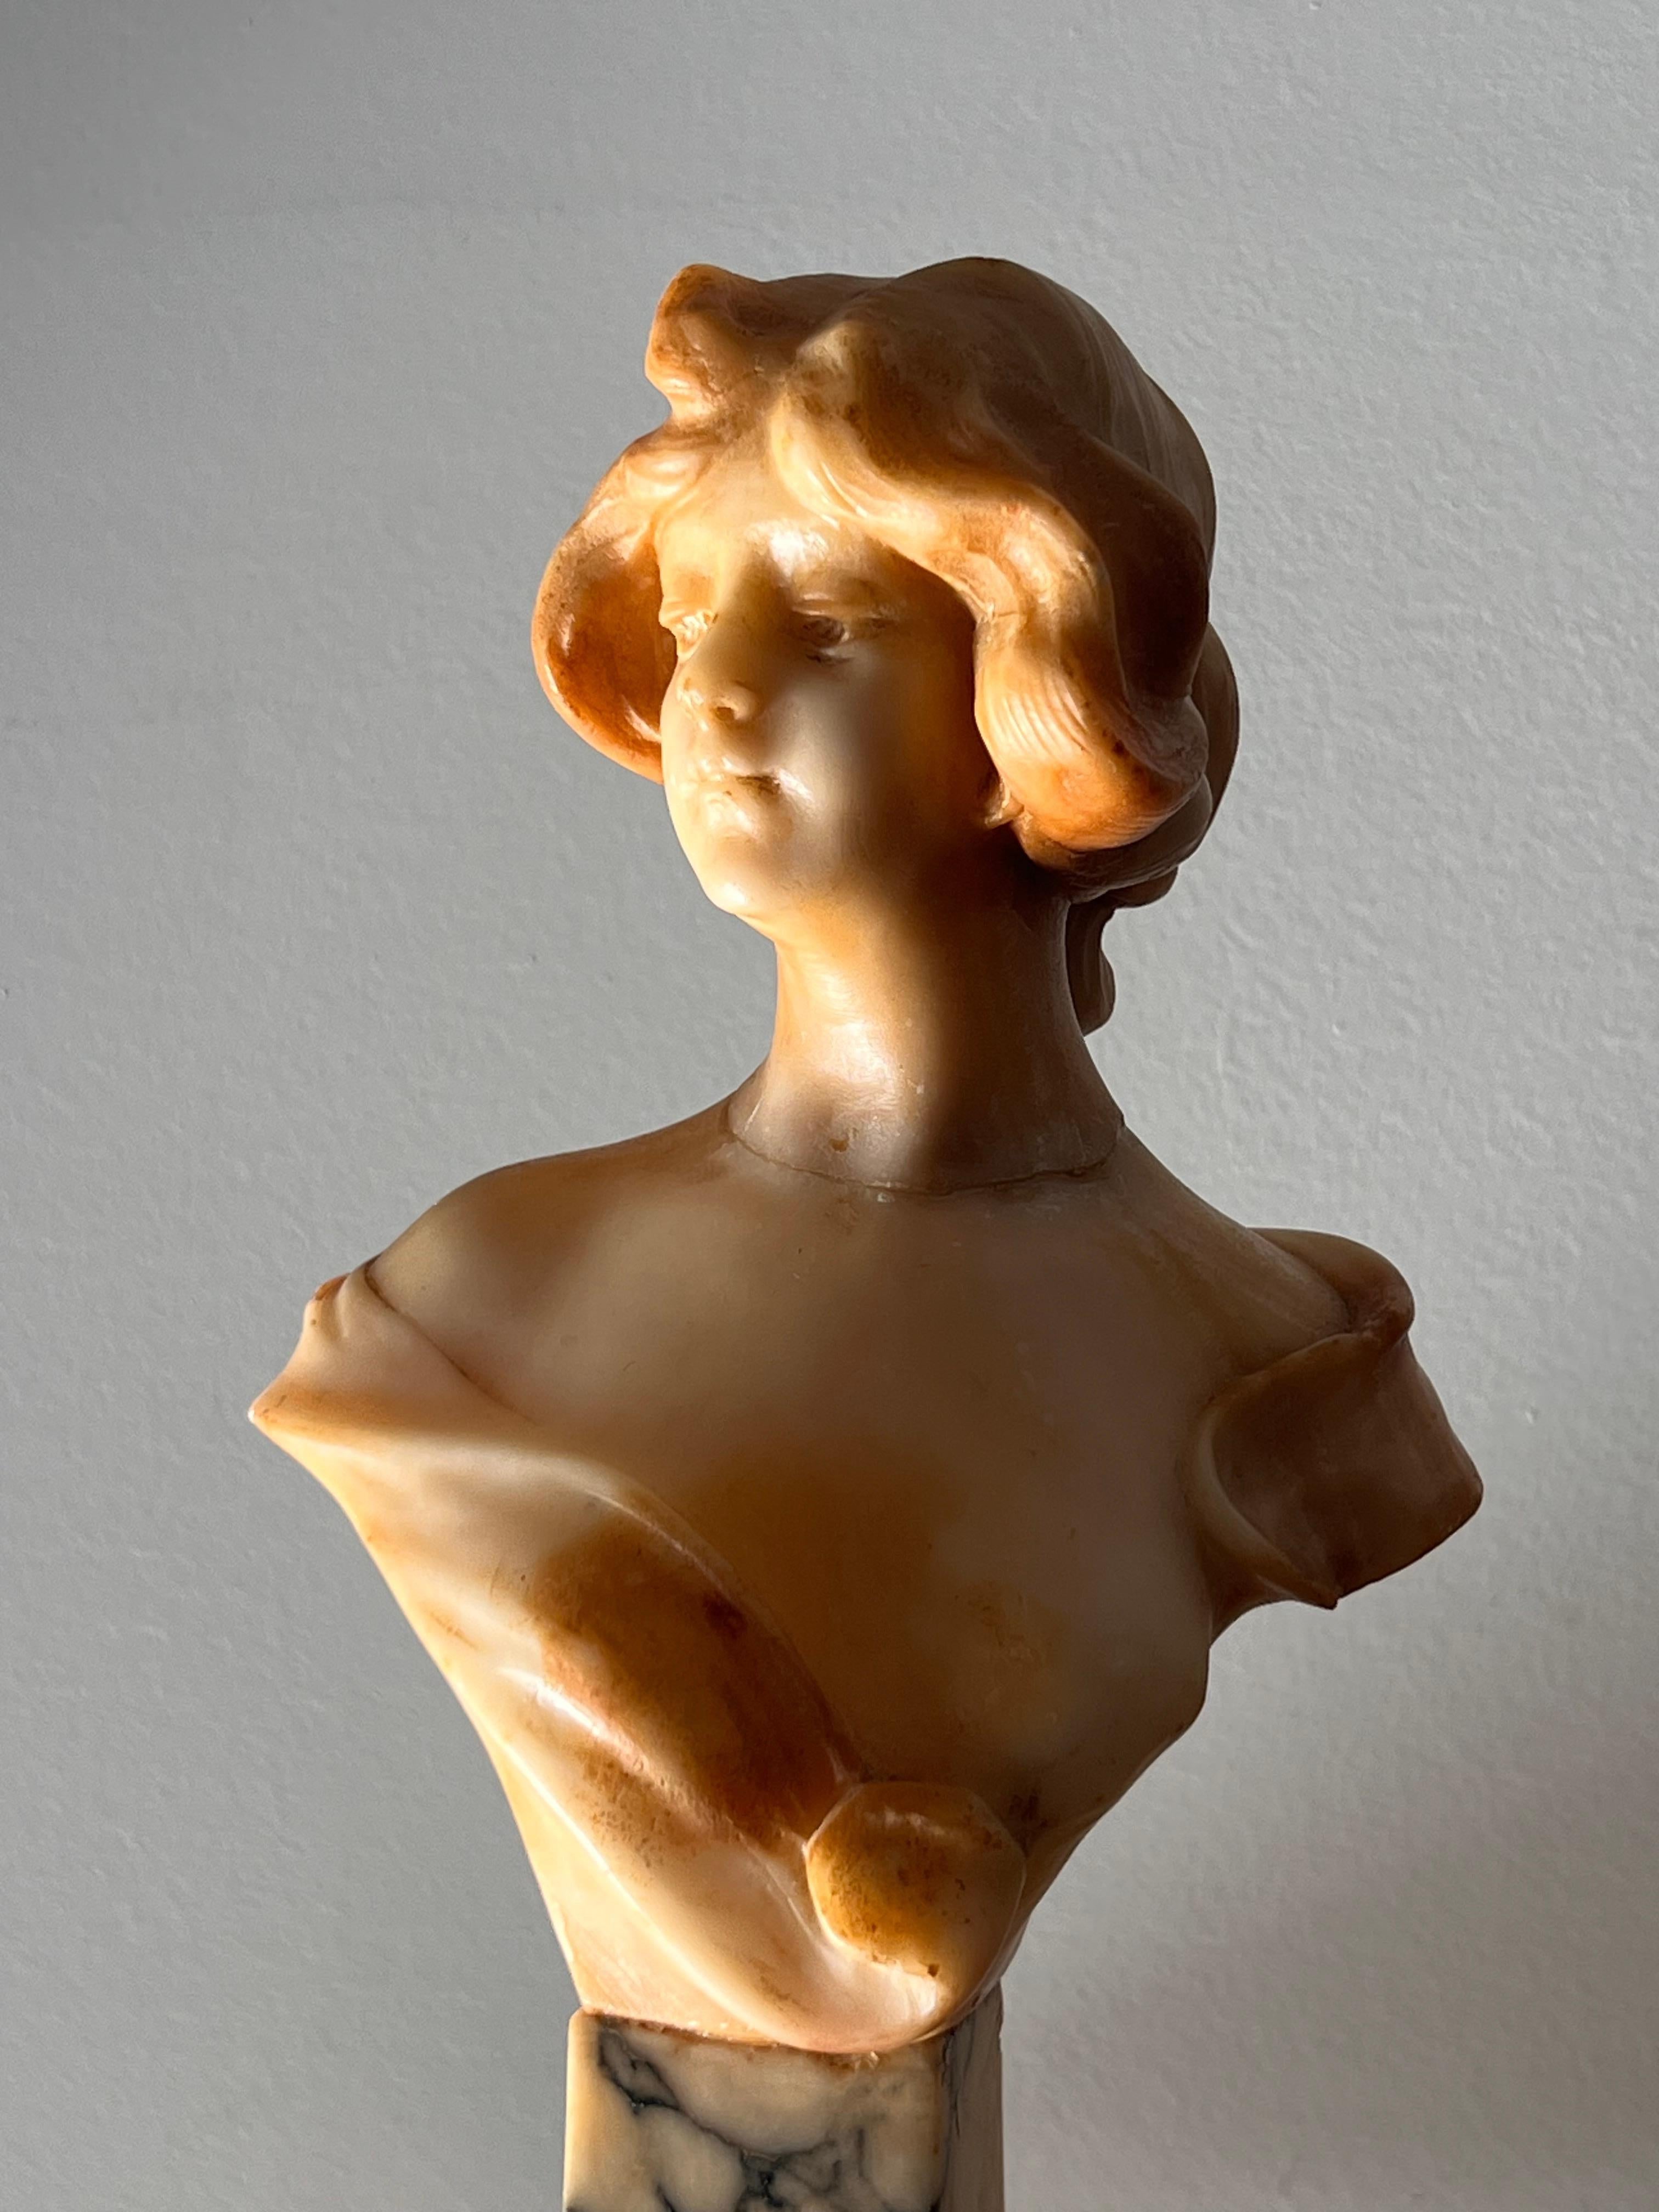 A sculpture of the bust of a woman carved out of alabaster and on a marble plinth, signed by artist, Florence, Italy, 20th century. Elements of rococo and neoclassicism. Please note that she has been repaired; a faint line is visible around the neck